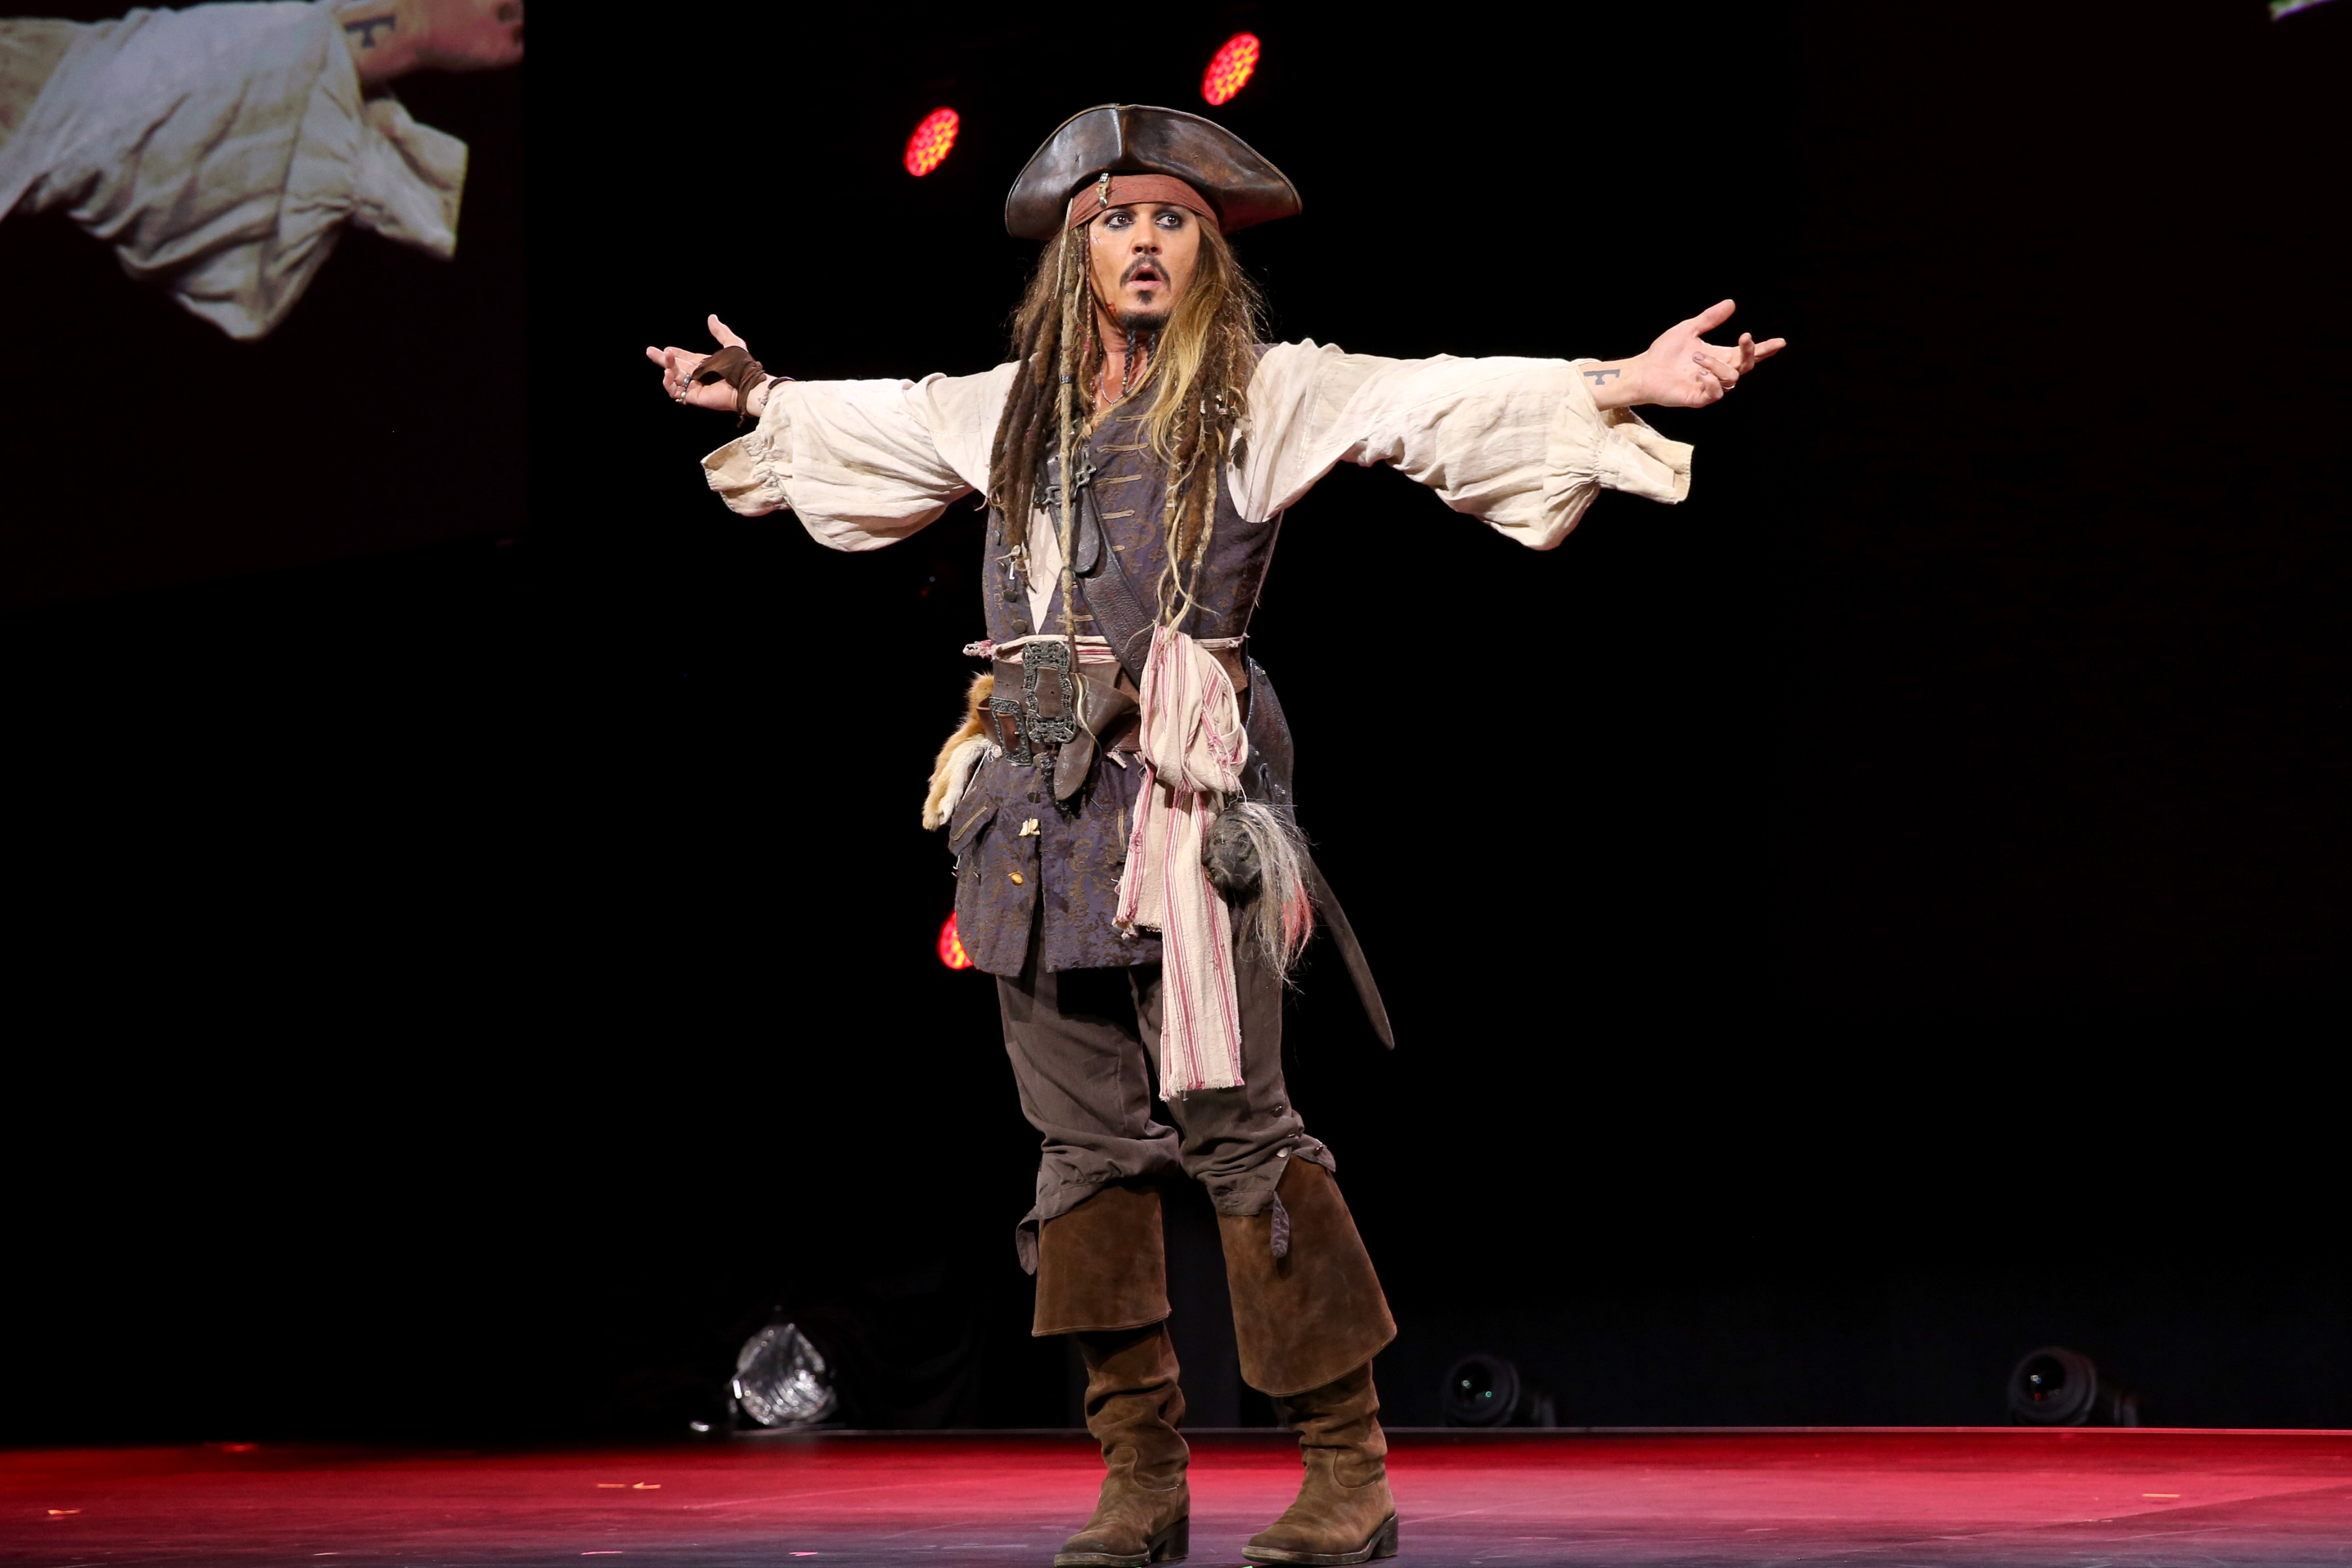 Johnny Depp as Jack Sparrow at Disney's D23 EXPO in Anaheim, 2015 | Source: Getty Images